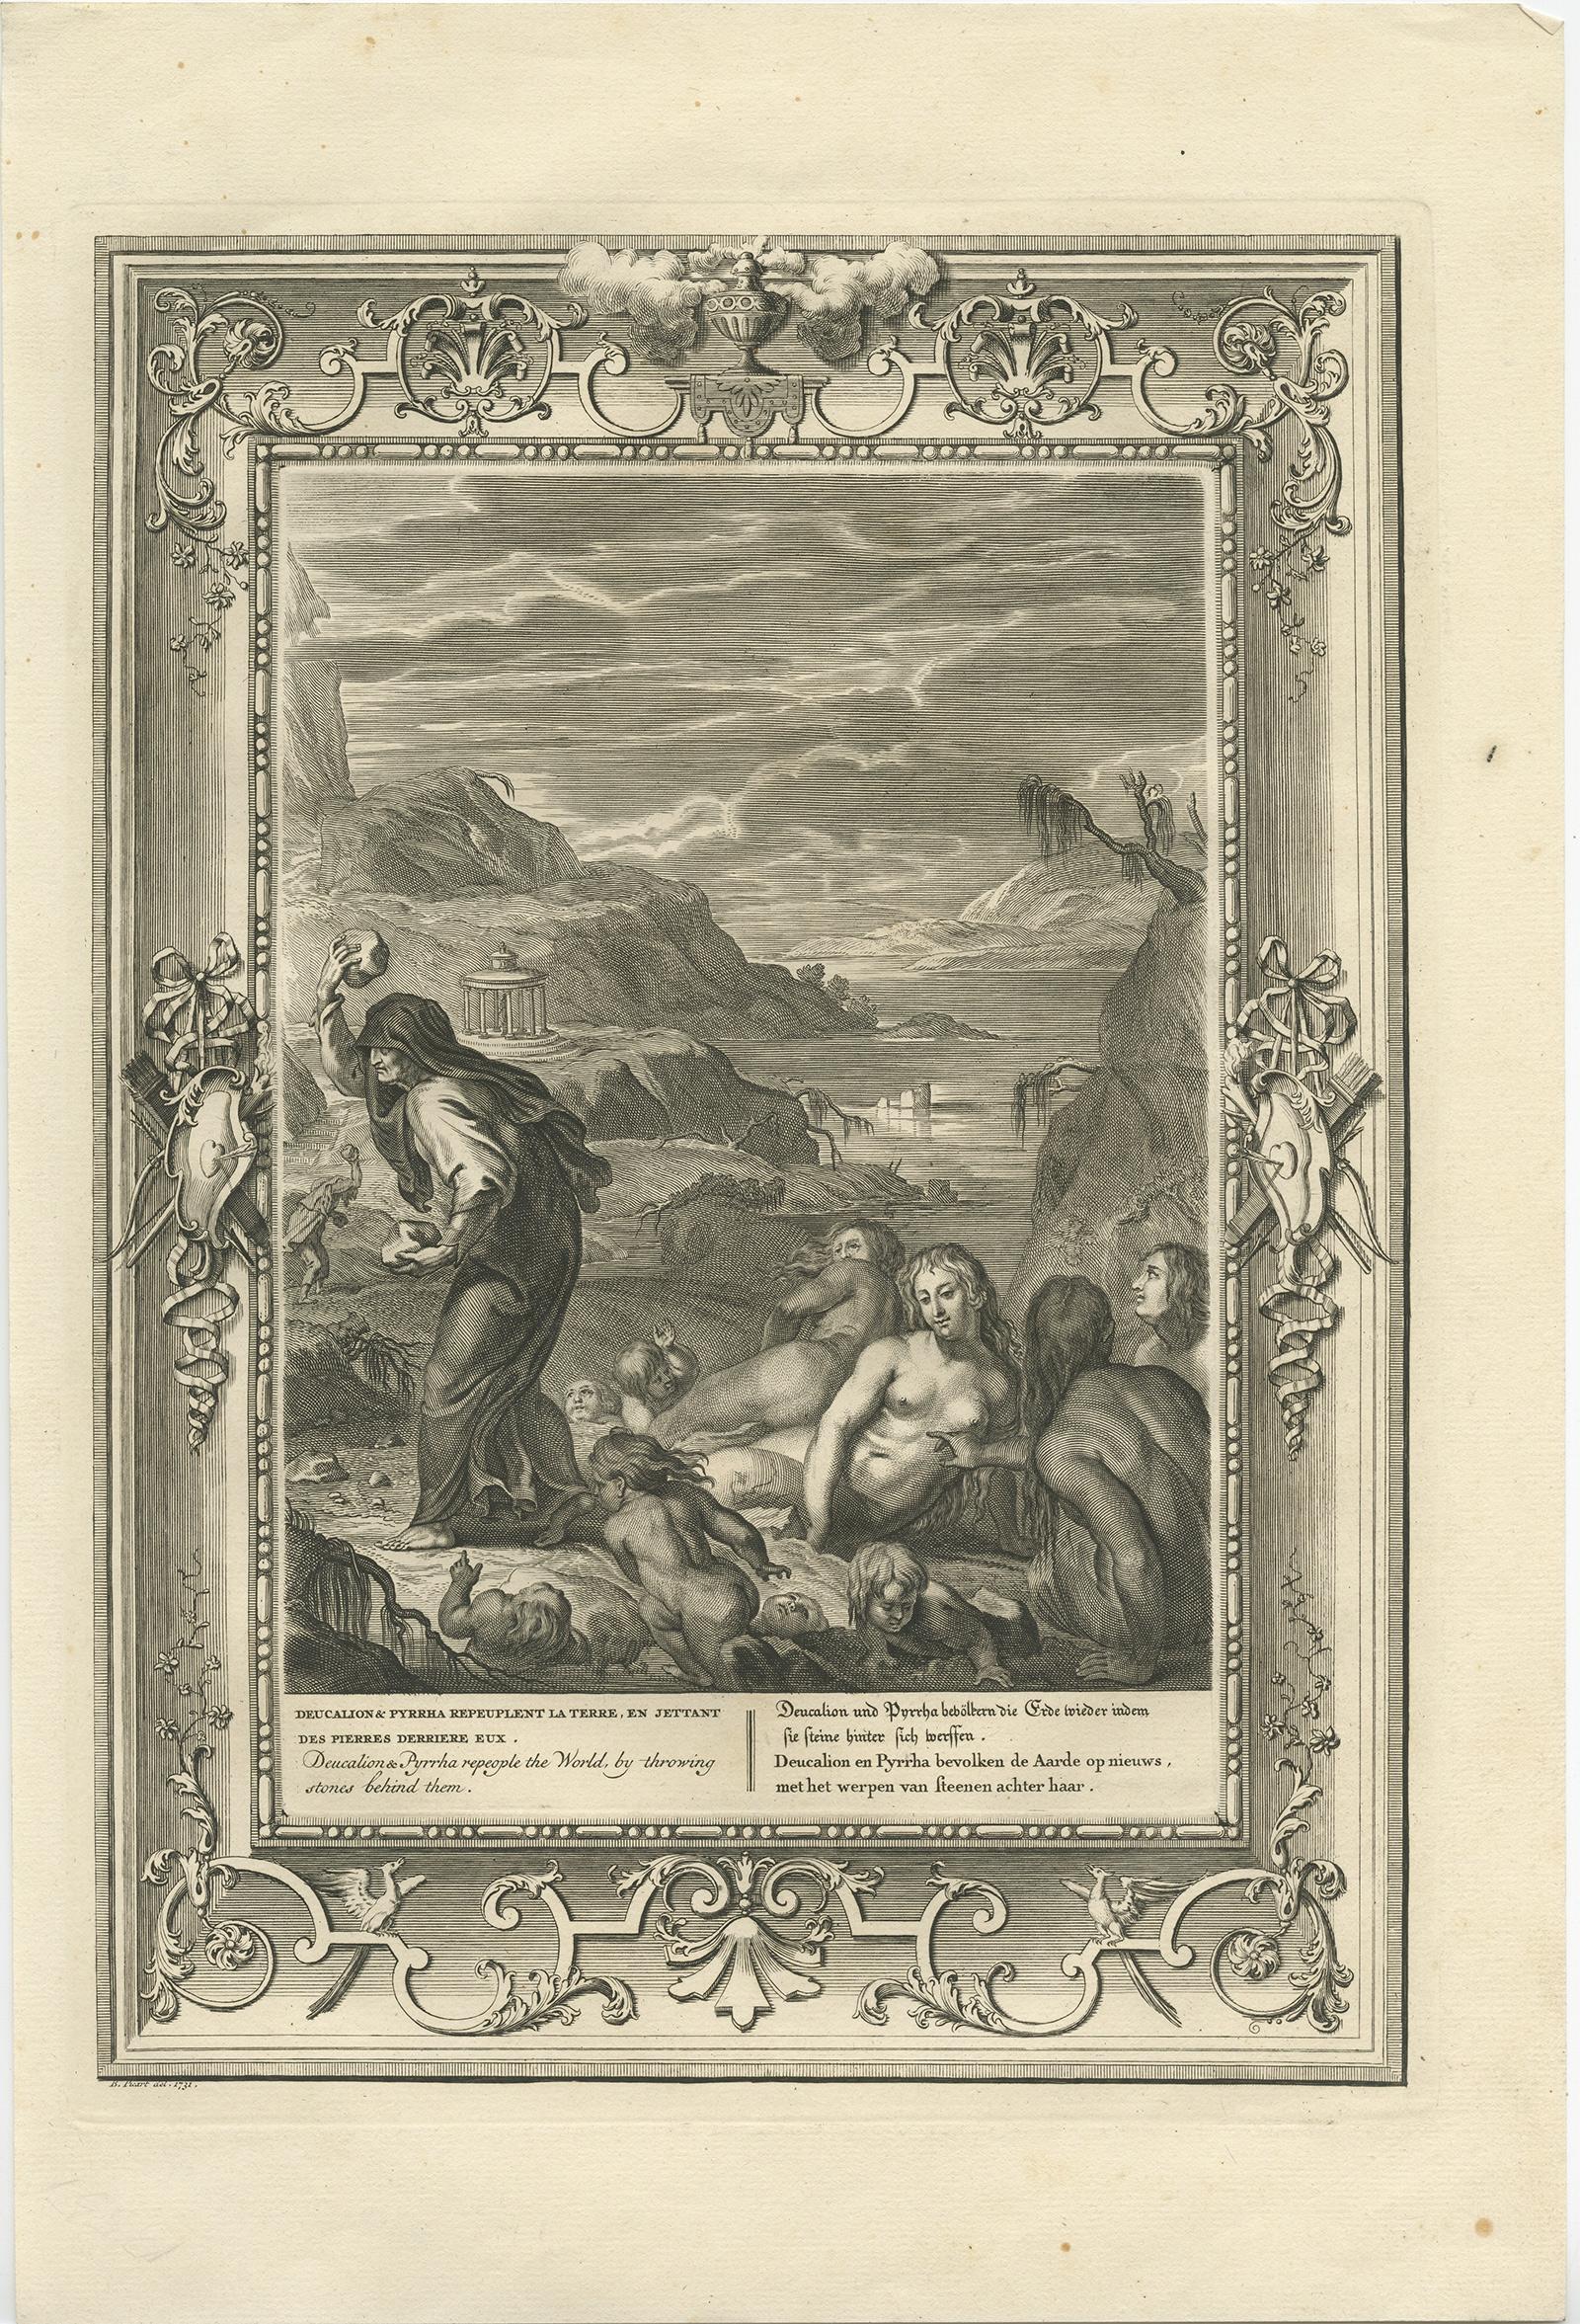 Antique print titled 'Deucalion & Pyrrha (..)'. 

This print depicts Deucalion and Pyrrha. Deucalion, who reigned over the region of Phthia, had been forewarned of the flood by his father, Prometheus. 

In Greek mythology Phthia was a city or